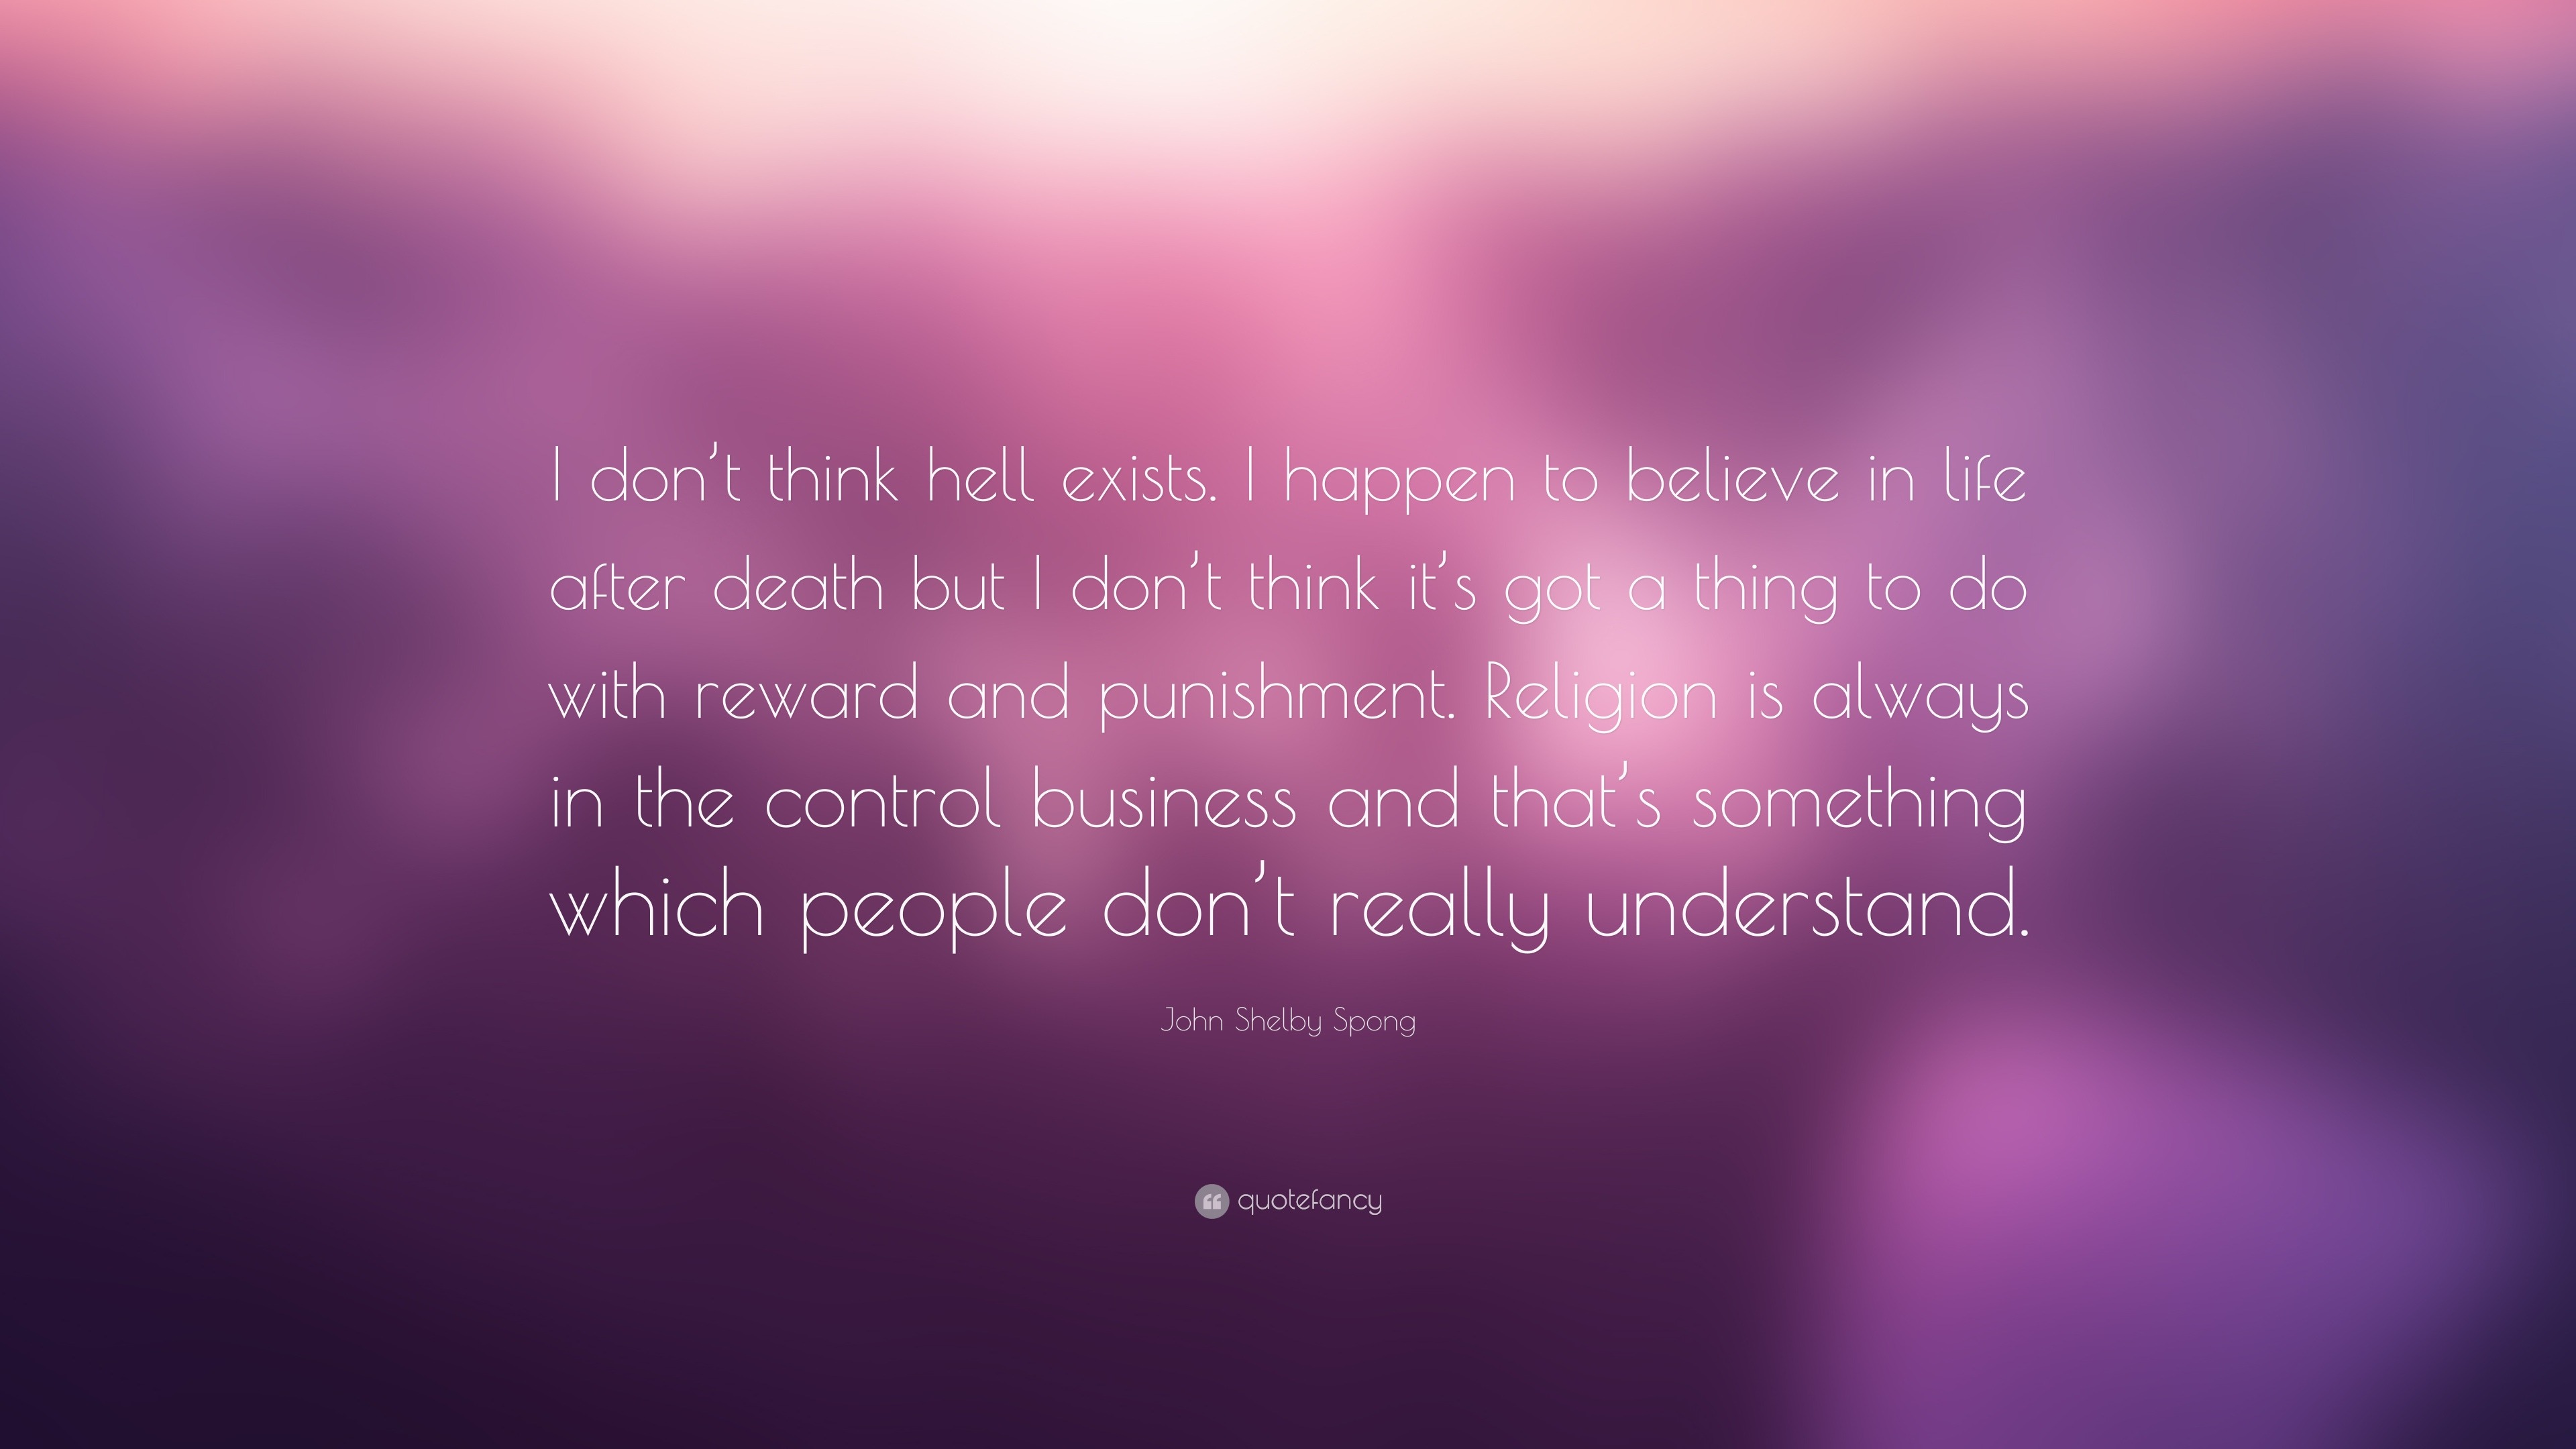 John Shelby Spong Quote: “I don’t think hell exists. I happen to ...